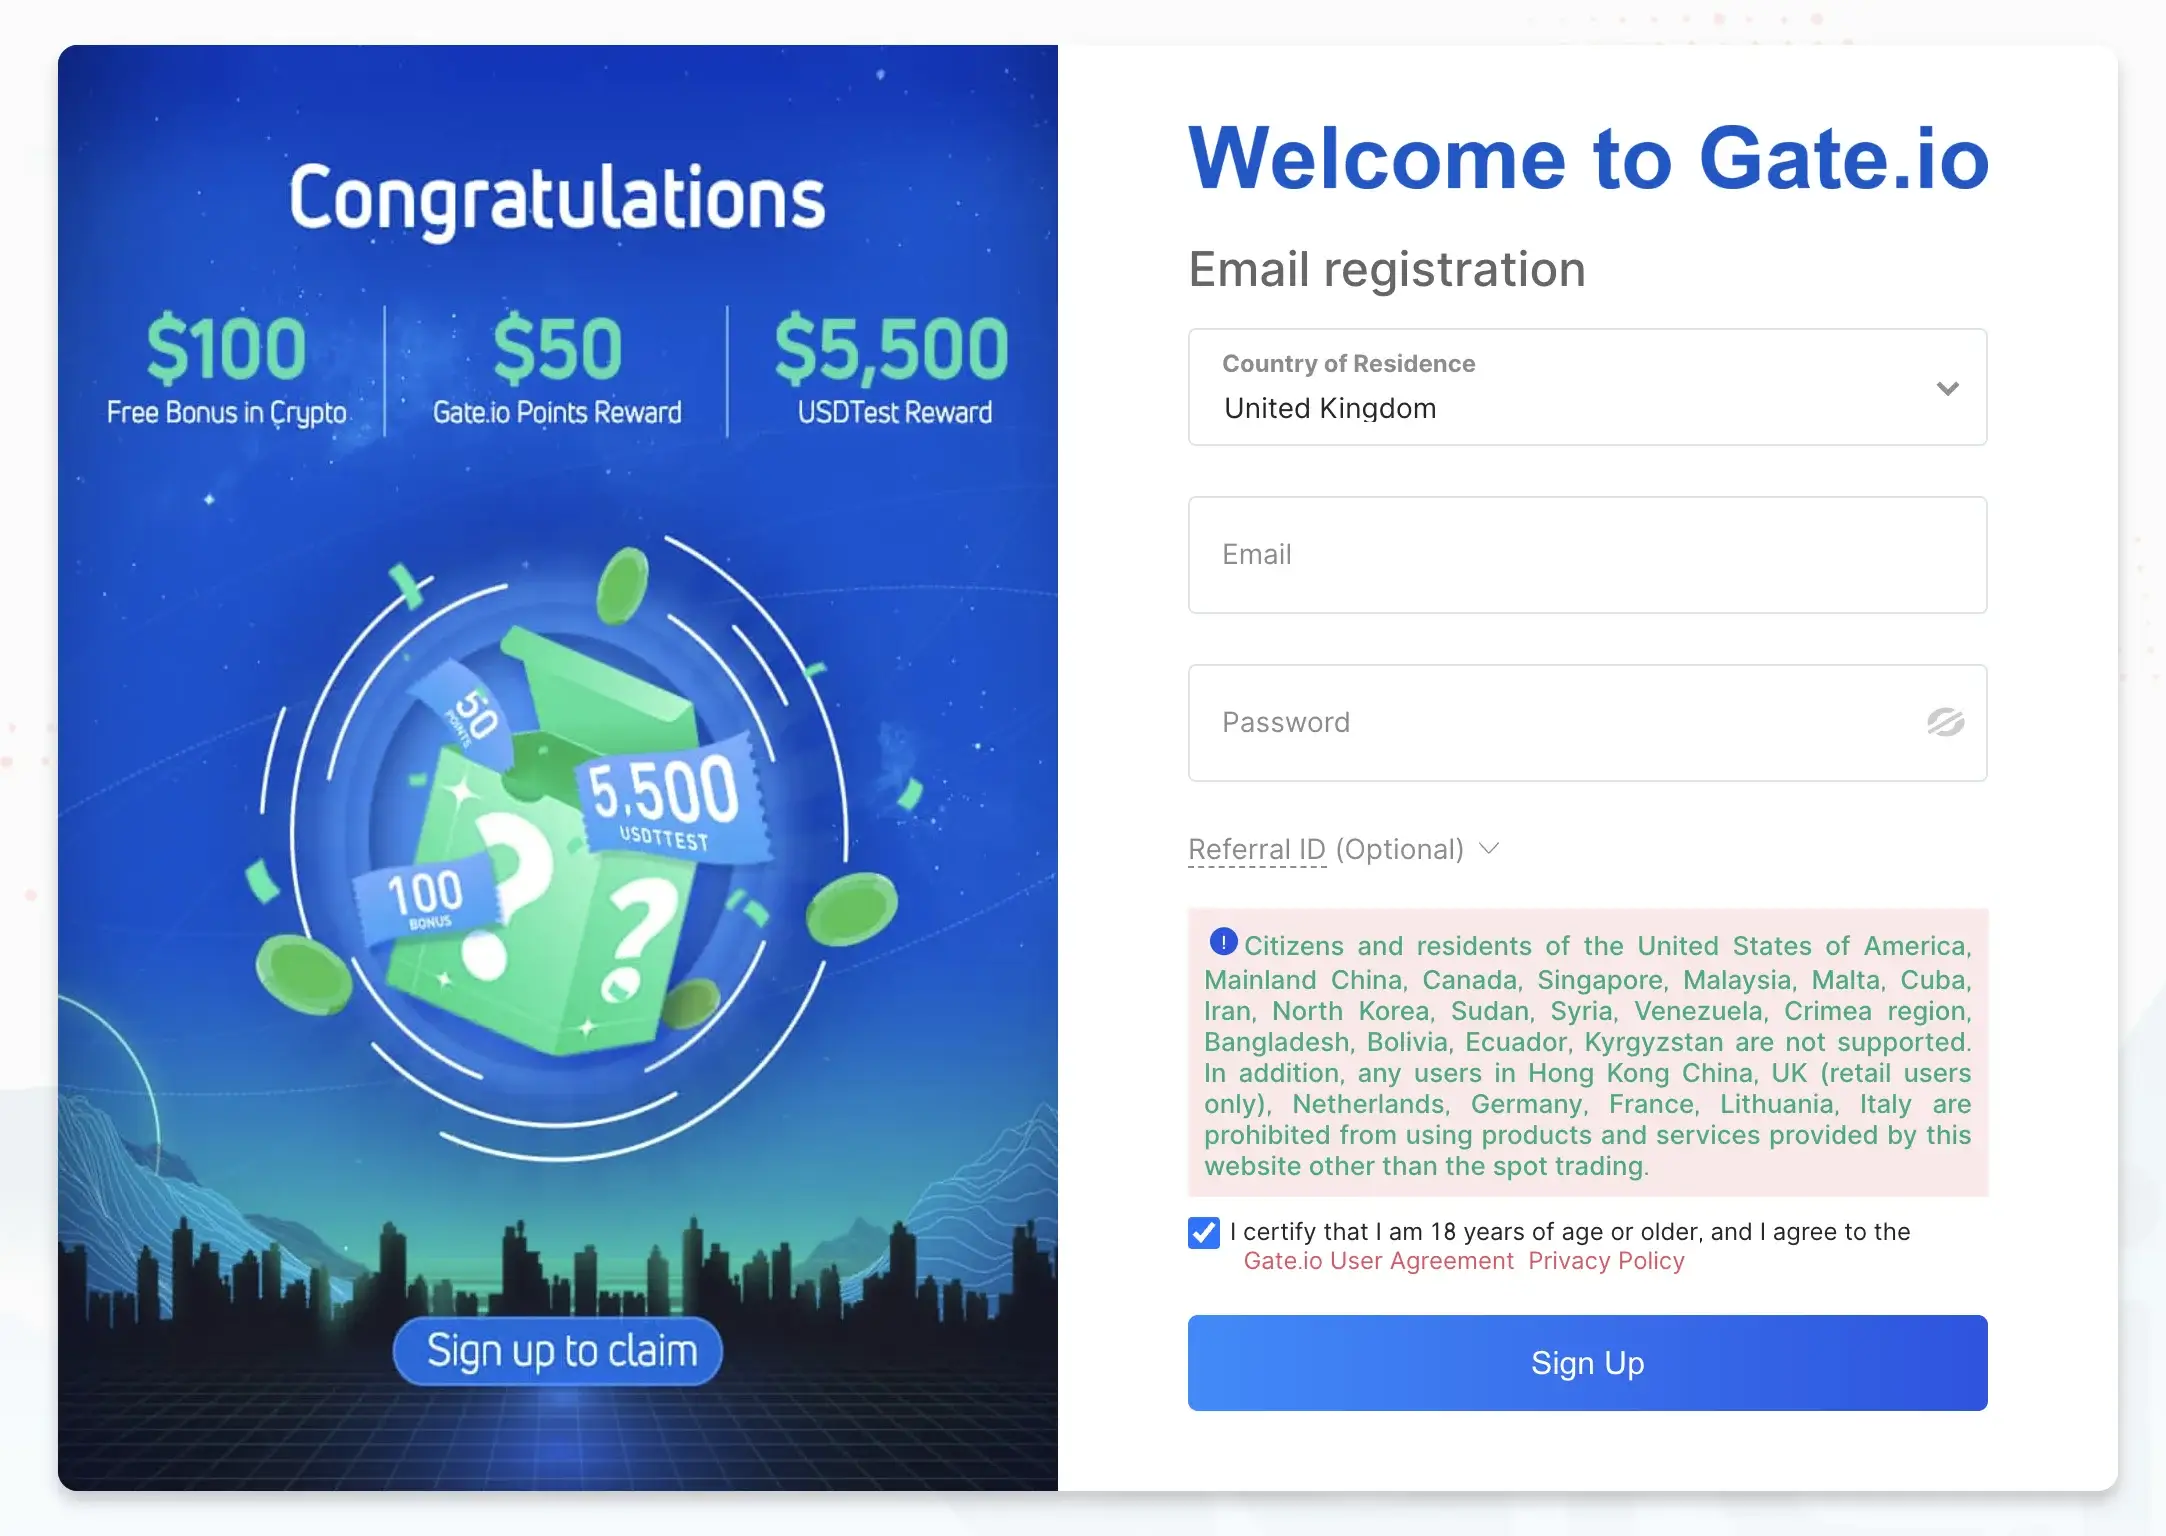 7. Gate.io - Unbox Your Luck and Get a $6,666 Prize